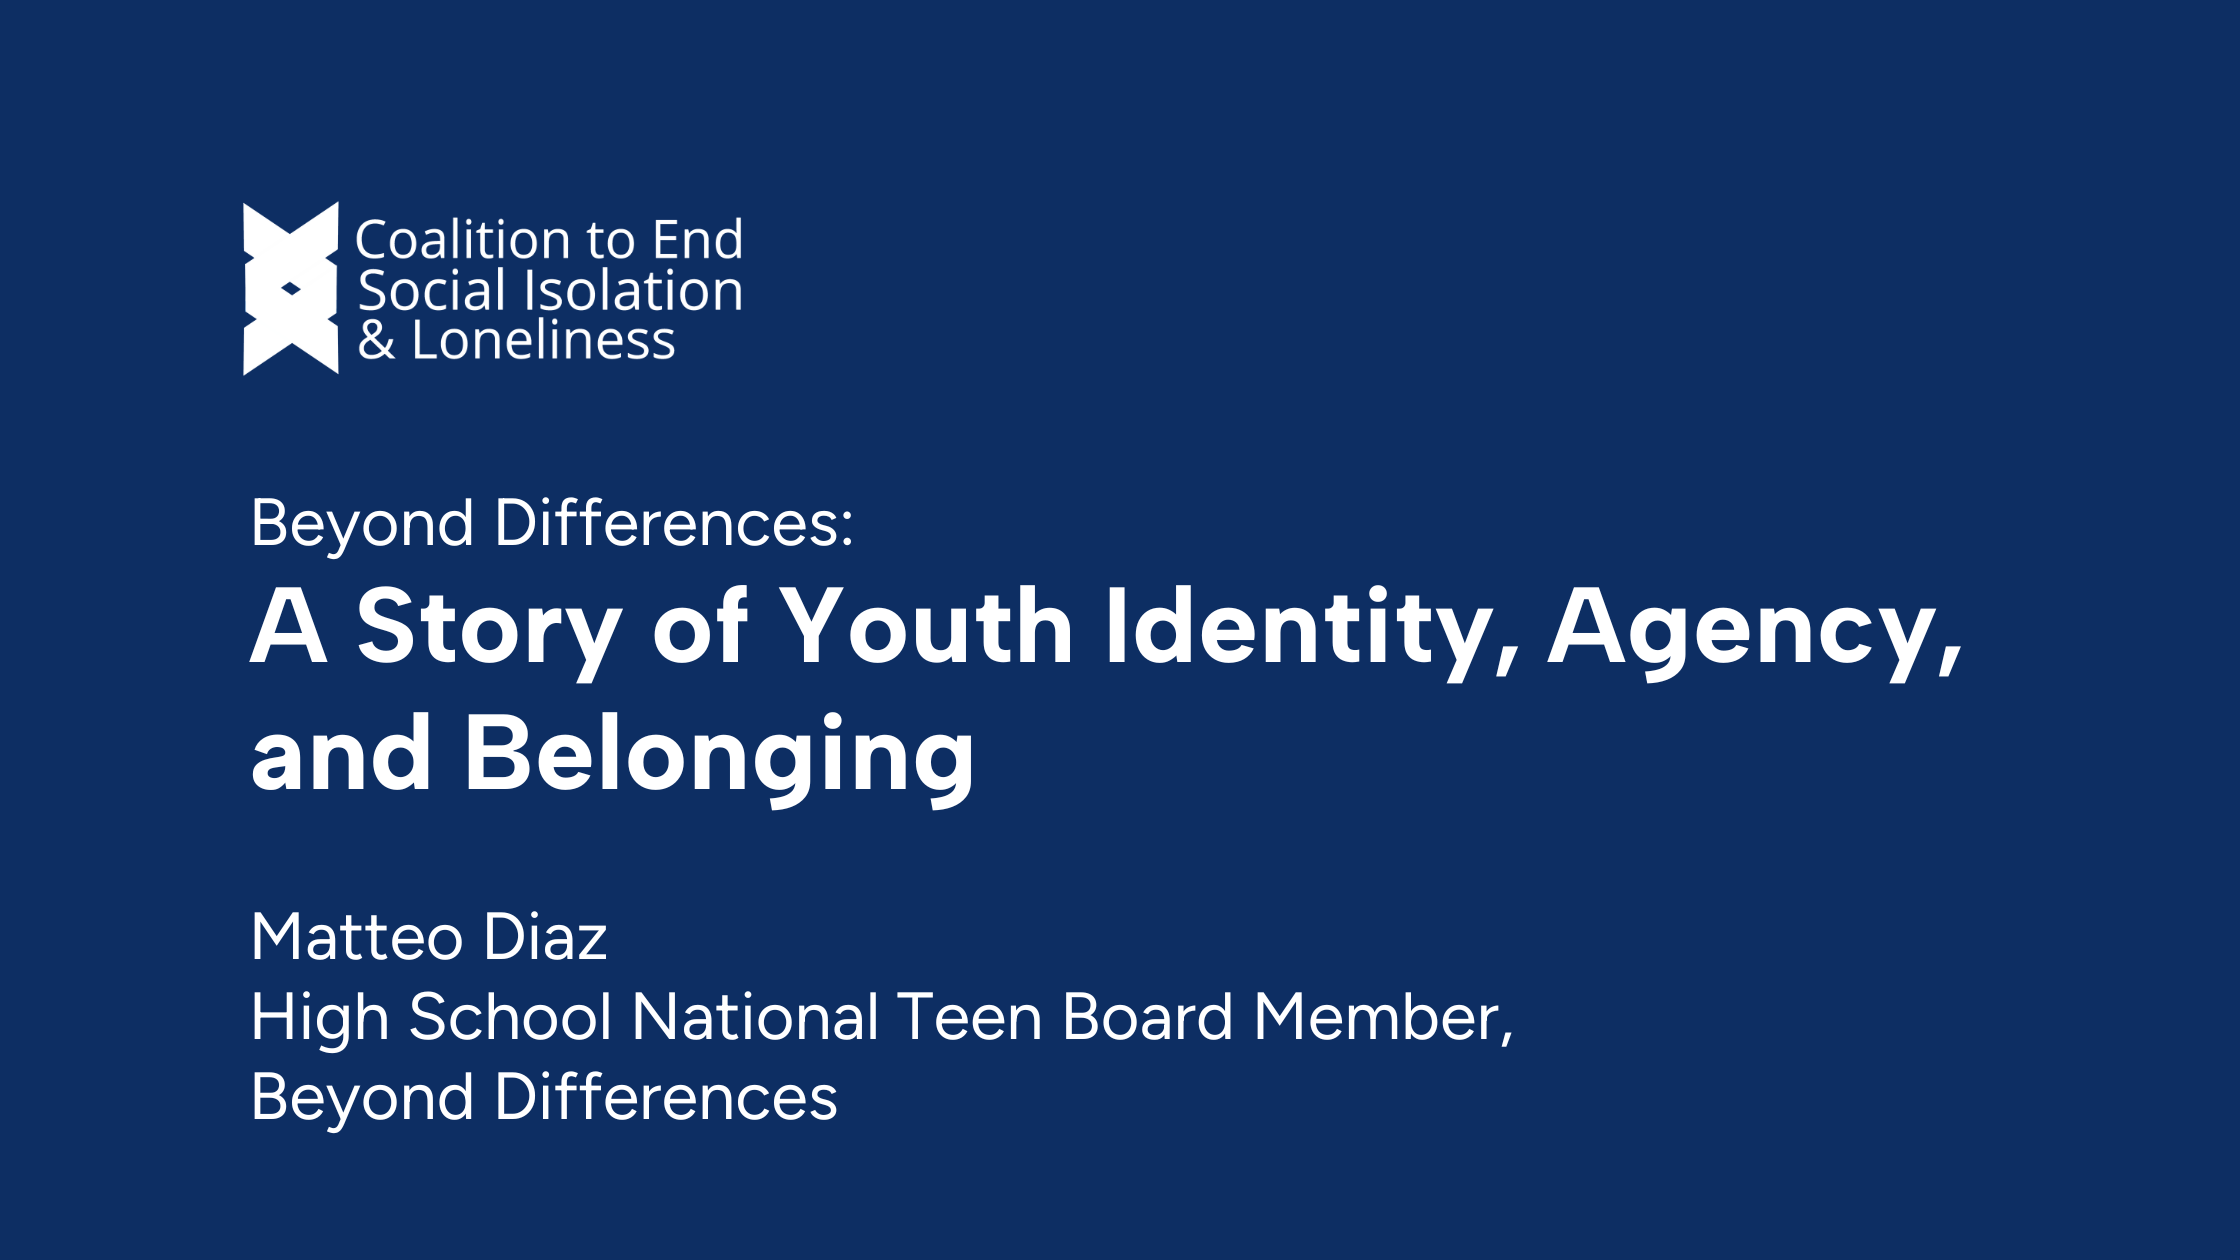 Beyond Differences: A Story of Youth Identity, Agency, and Belonging